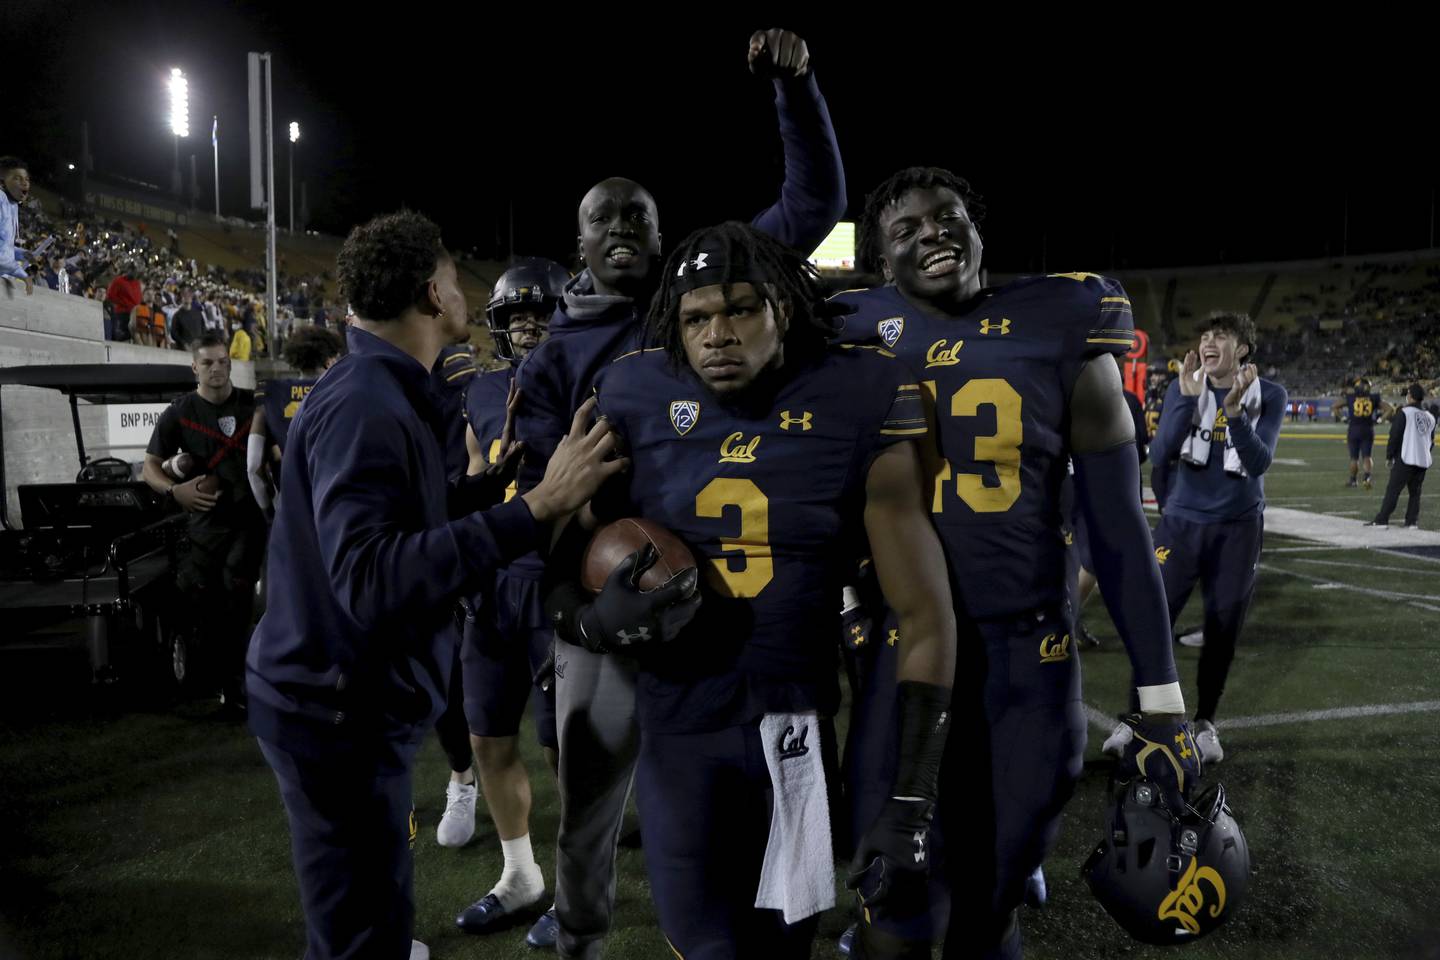 California safety Elijah Hicks celebrates with teammates after an interception against Oregon State on Oct. 30, 2021 in Berkeley, Calif.